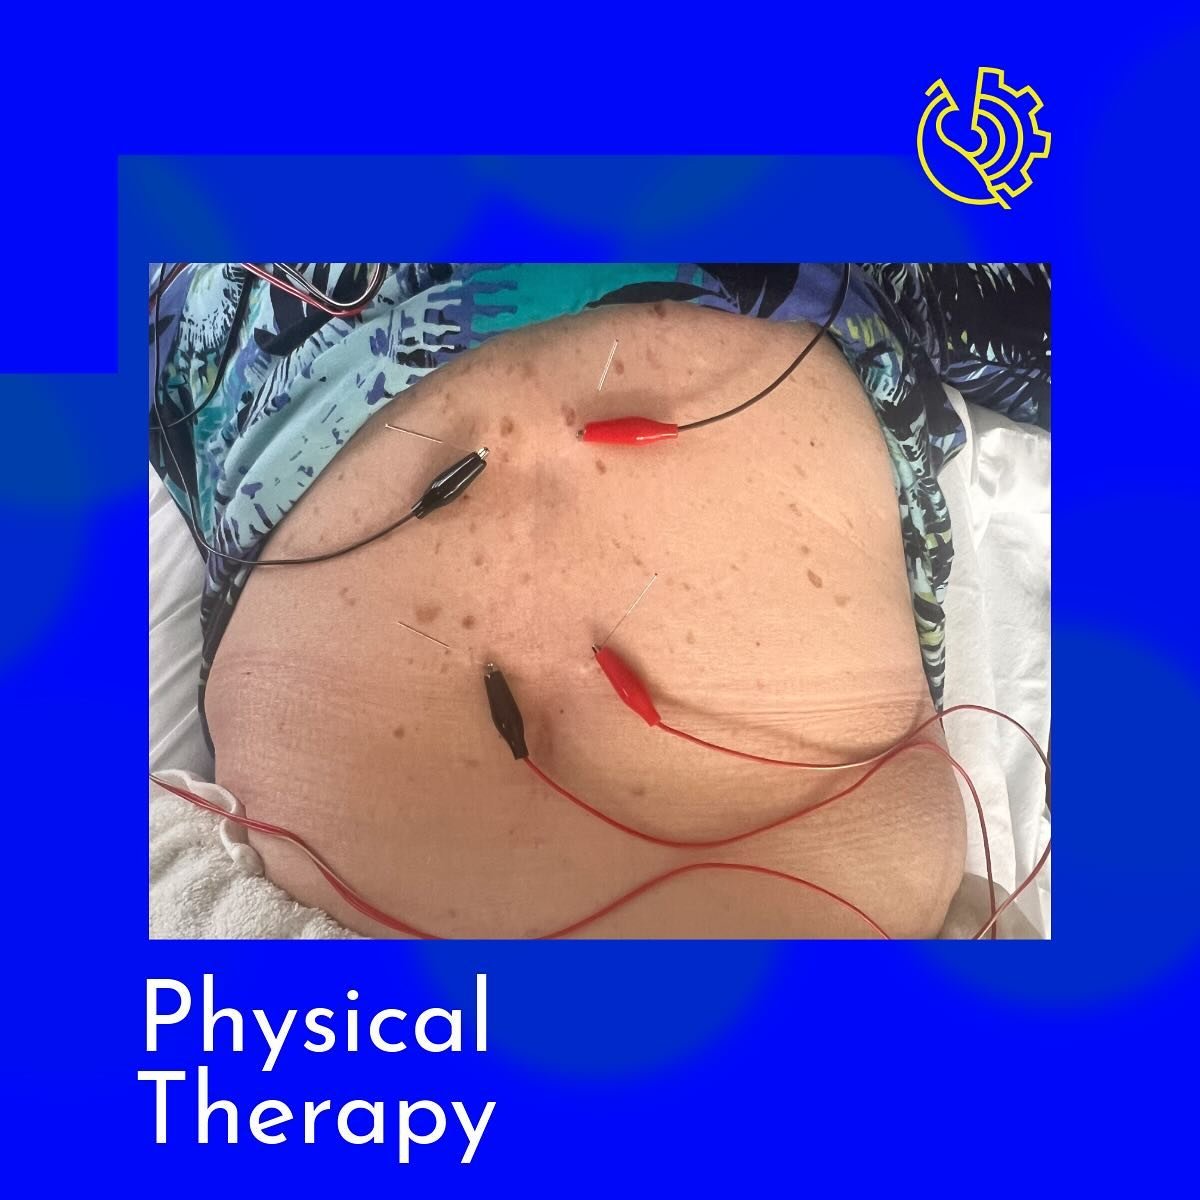 🪡 Dry needling with electrical stimulation for low back pain, can be an extremely effective modality in conjunction with the right kinds of movements to get through the acute phase of back pain more quickly than if left alone. 

  Muscle spasms that